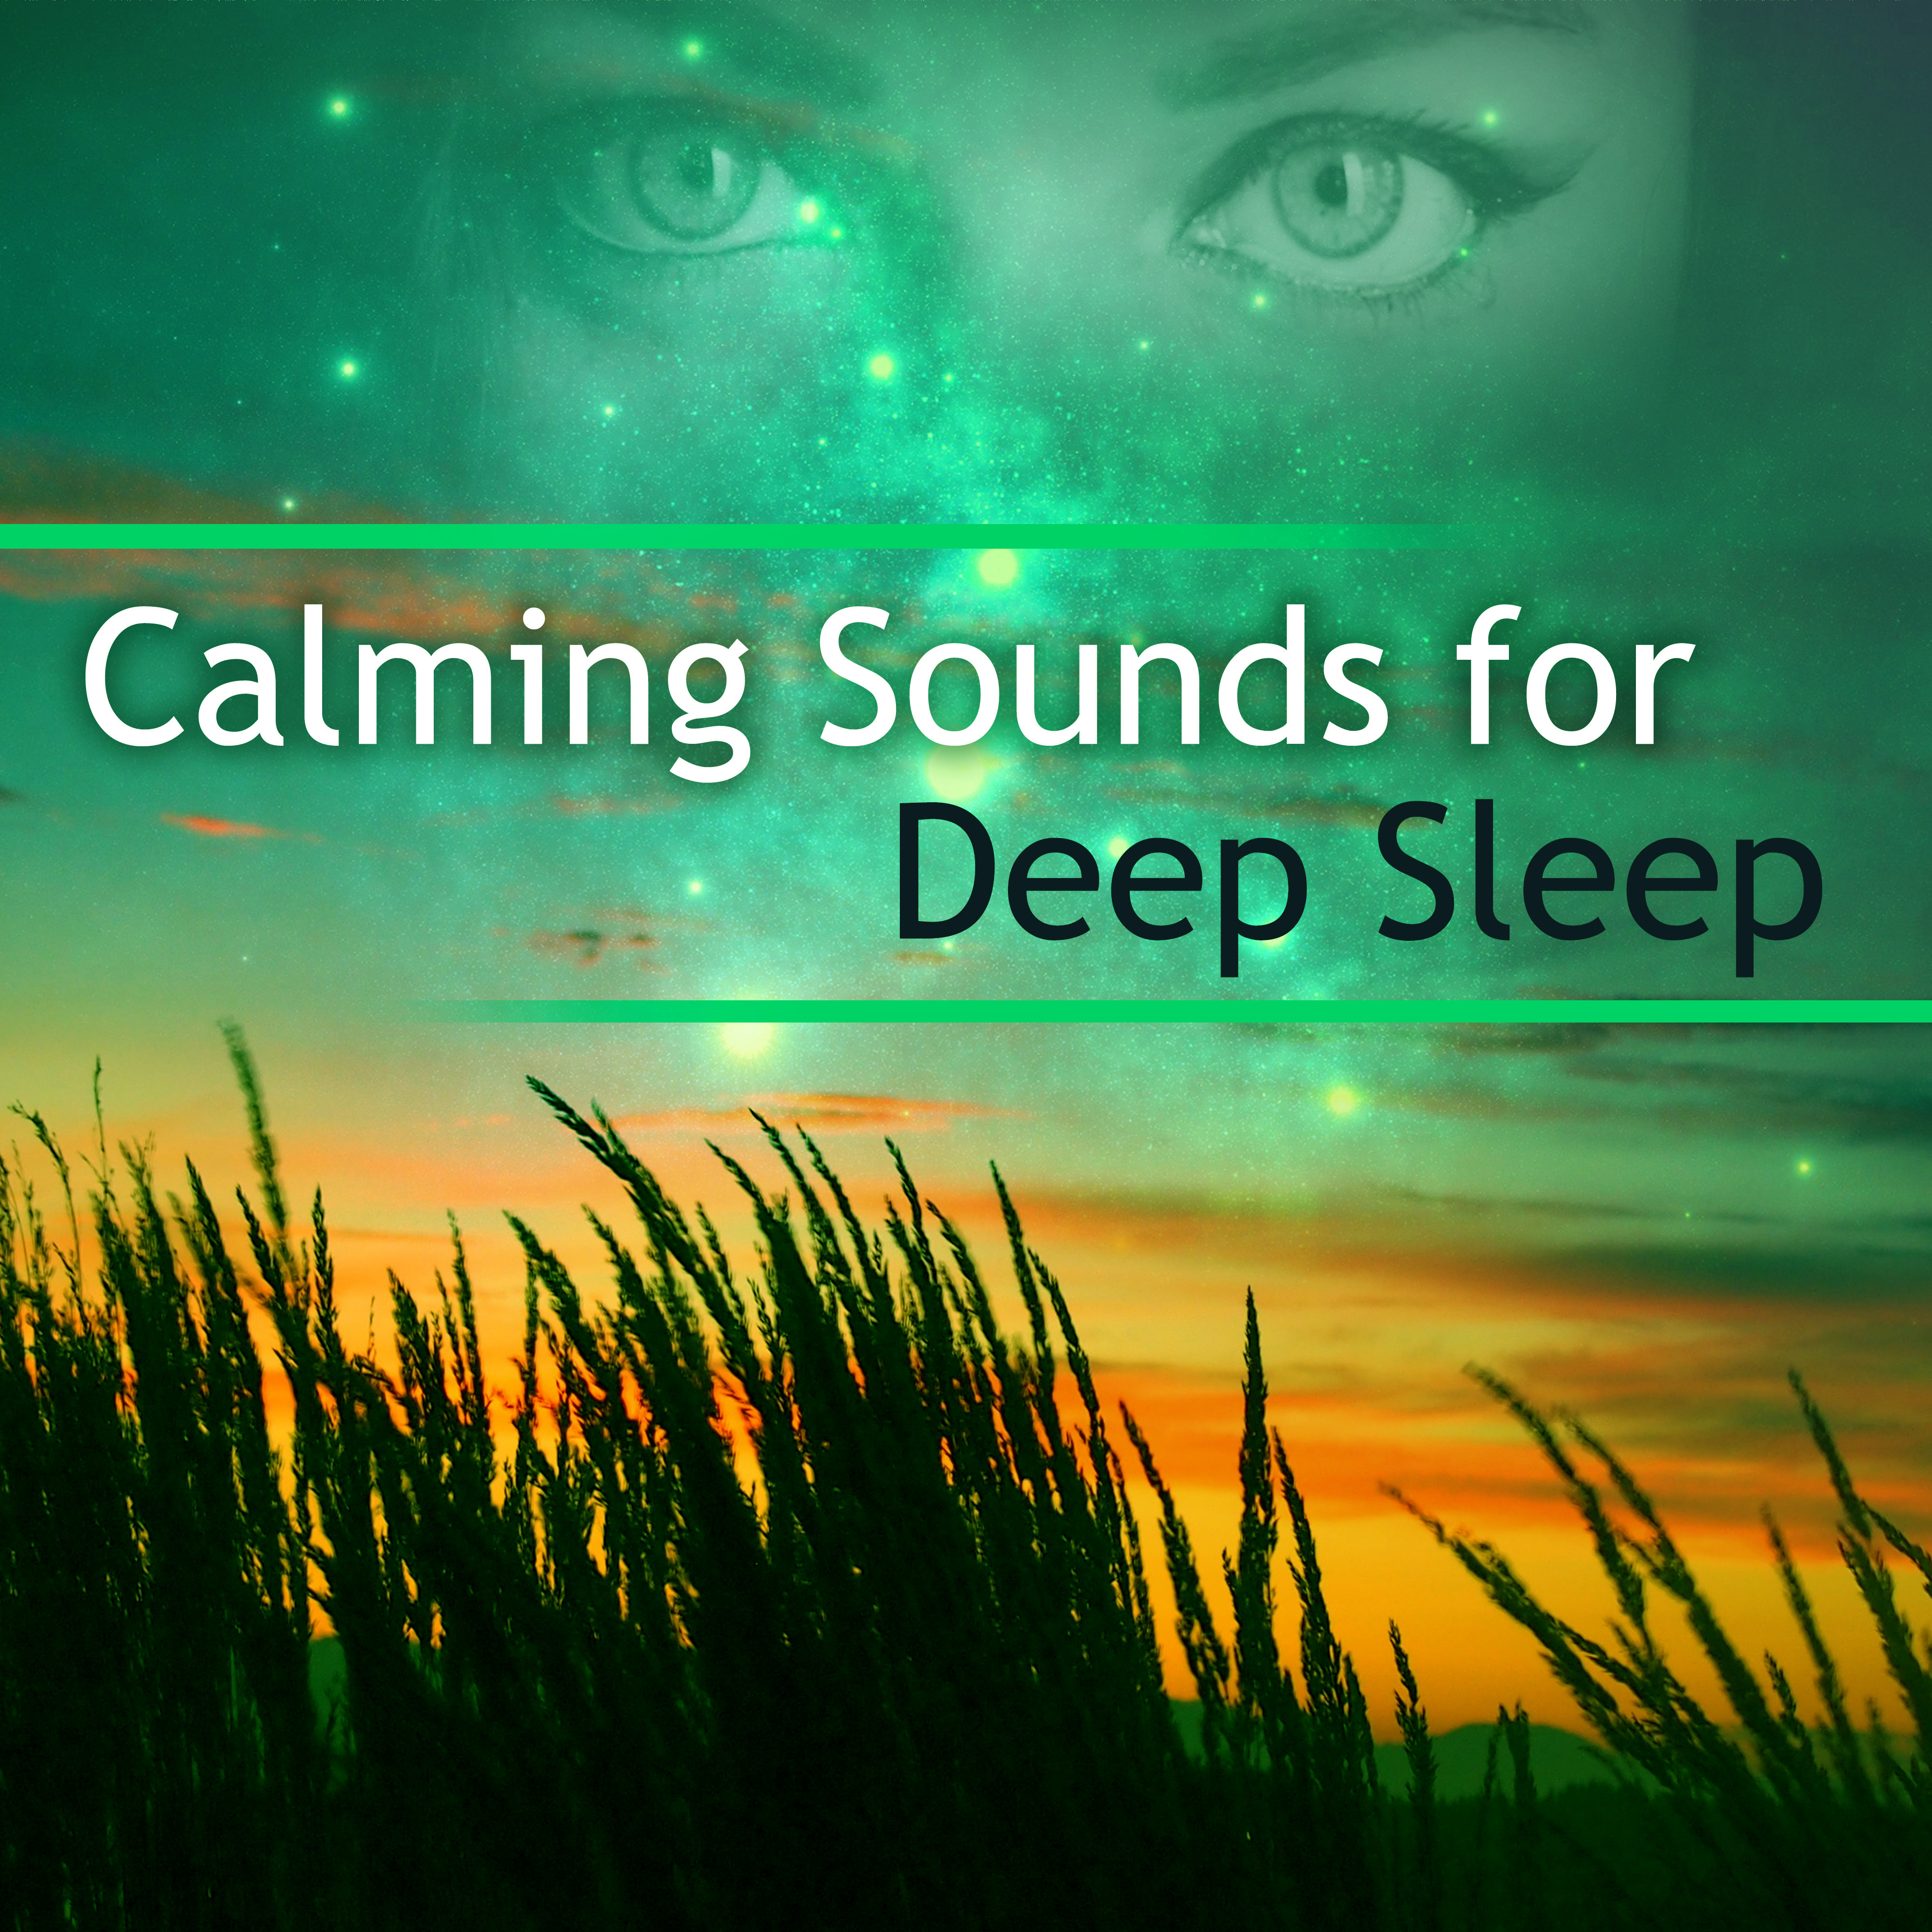 Calming Sounds for Deep Sleep  Stress Relief, Deep Sleep, Soothing Sounds, New Age Relaxation, Peaceful Night